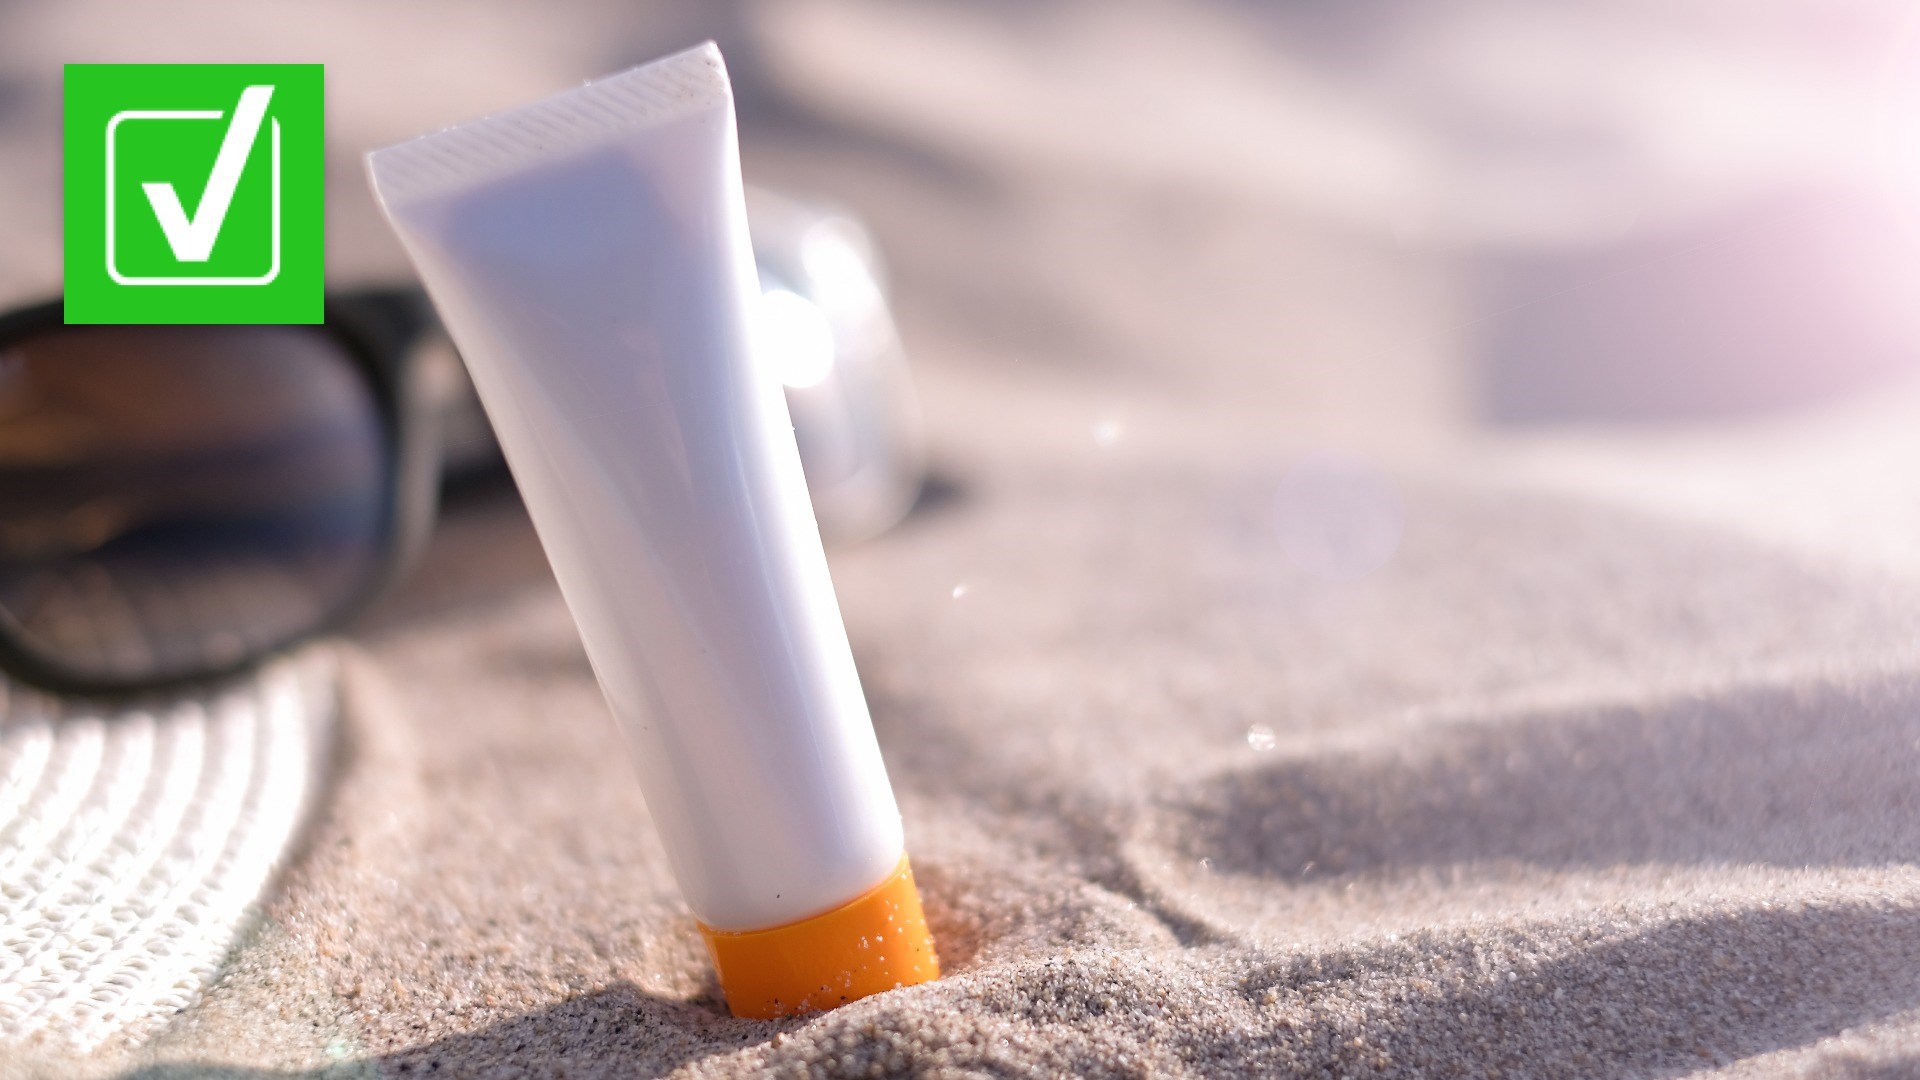 A WCNC Charlotte viewer reached out to ask if they should be concerned about a new report with benzene, a cancer-causing chemical, in popular sunscreens.